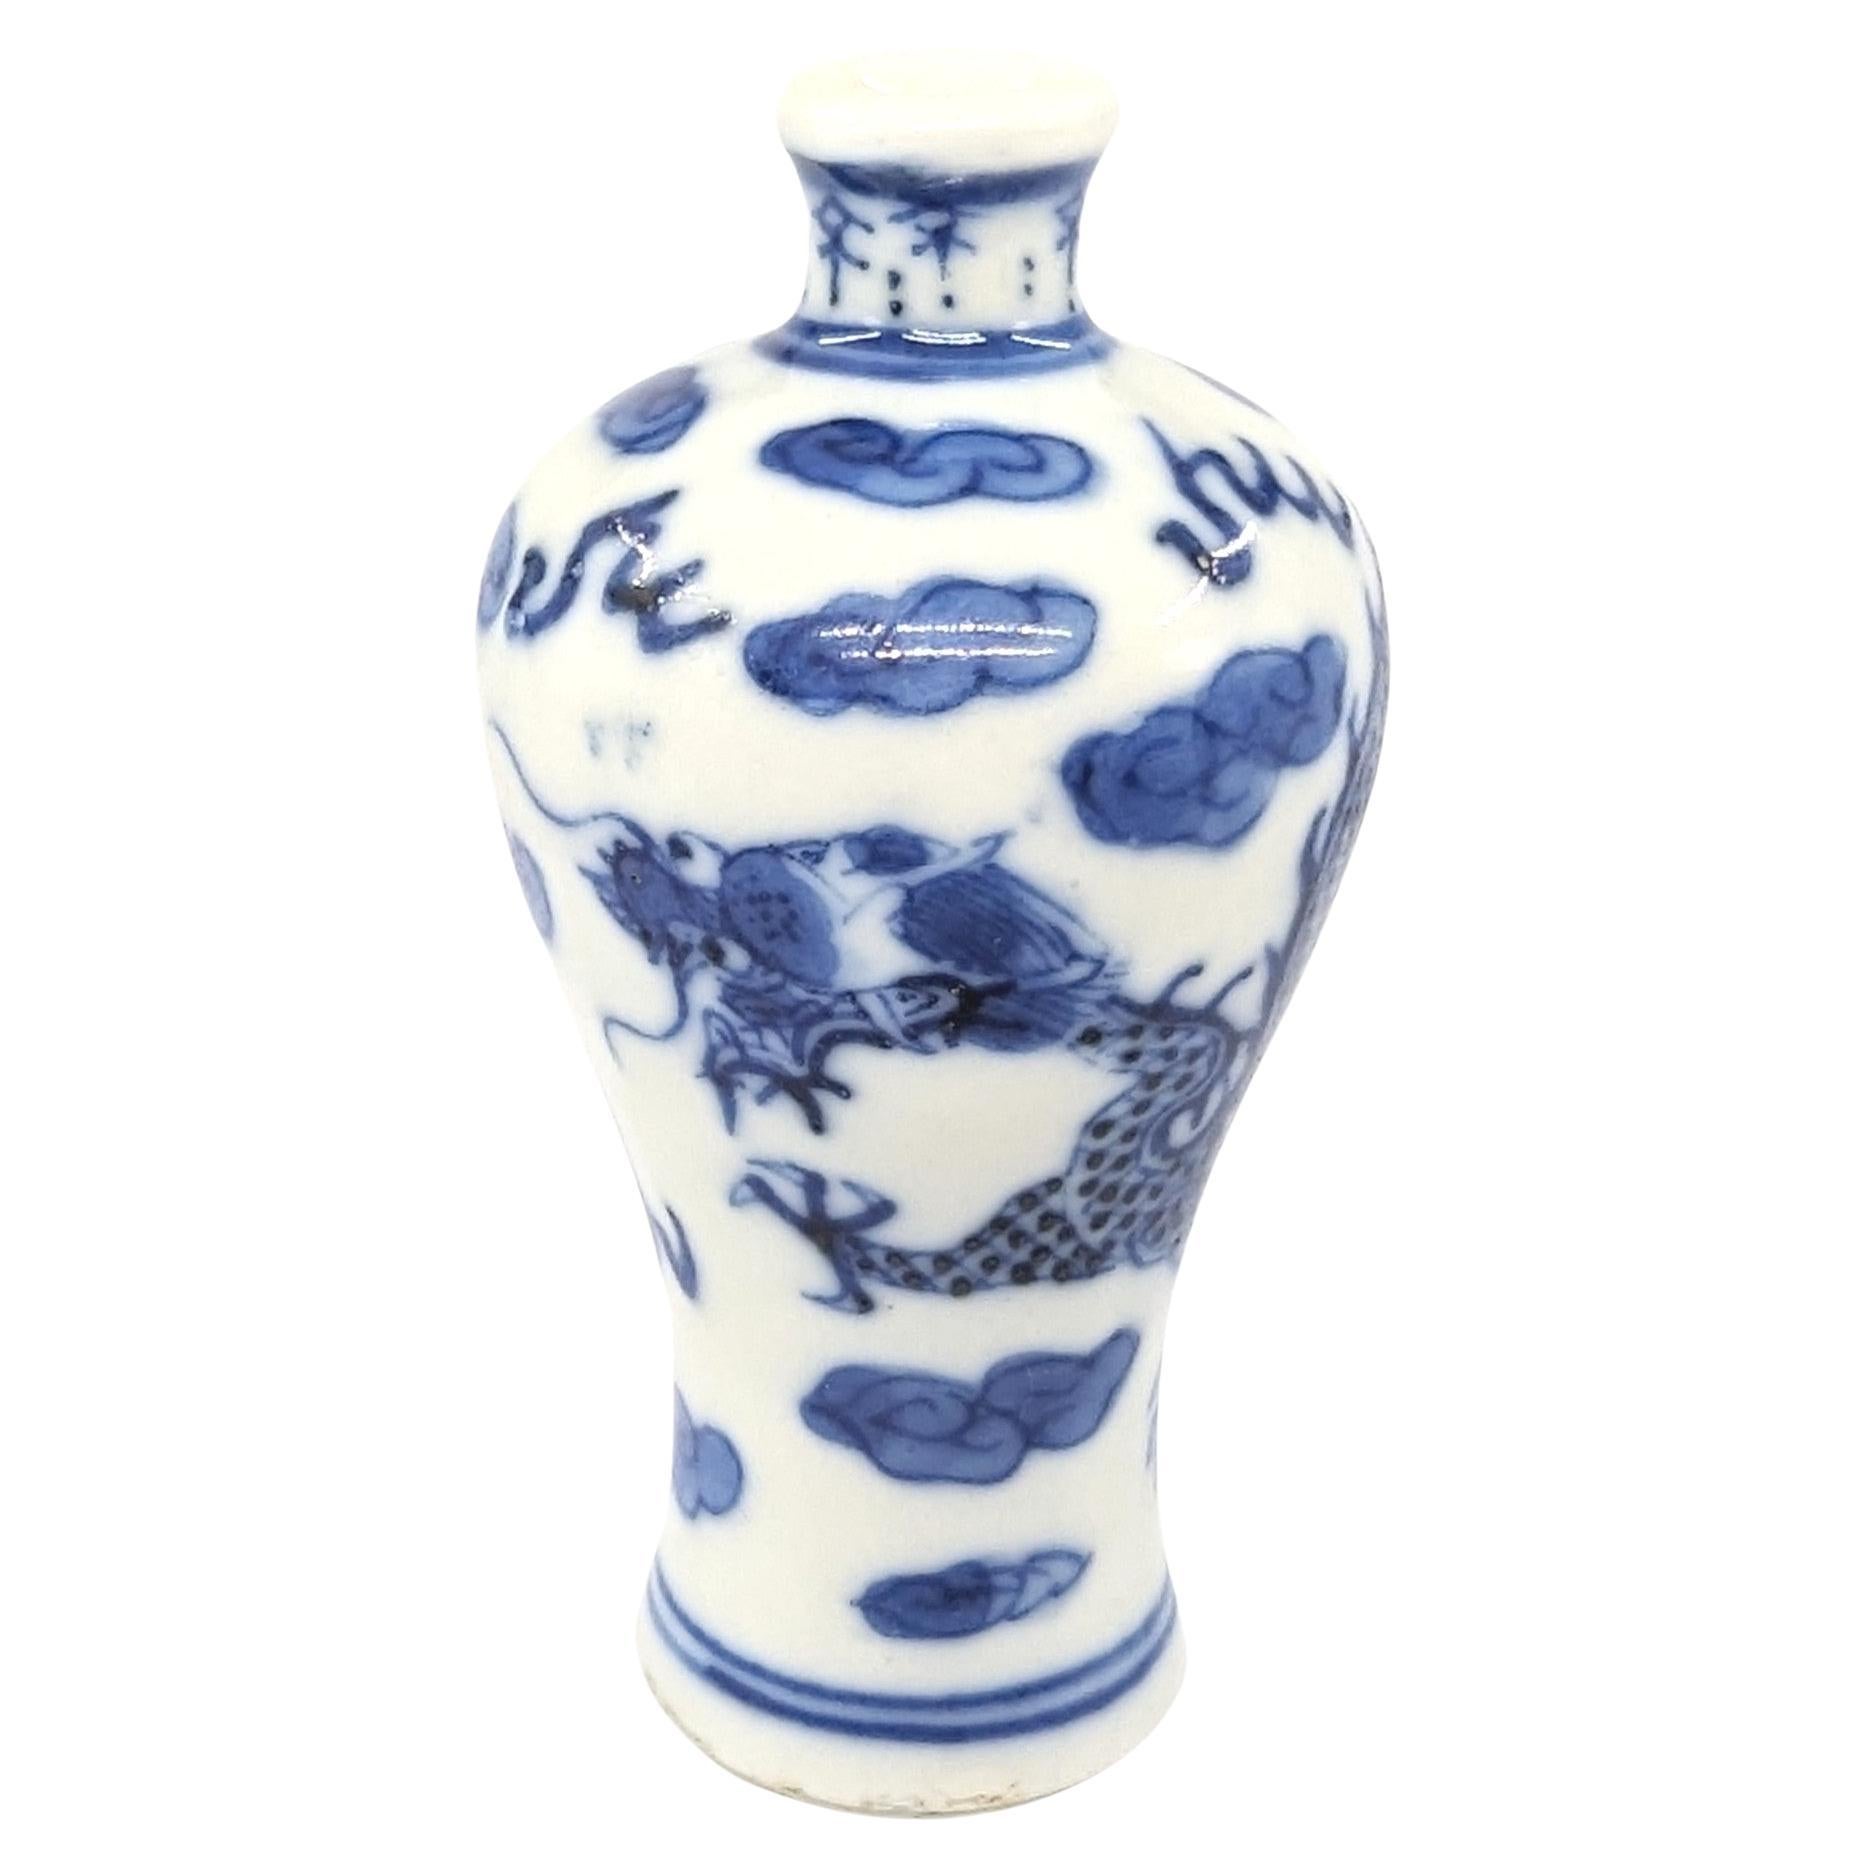 Antique Chinese porcelain snuff bottle in meiping form, painted in underglaze blue and white with a lively four clawed dragon chasing a pearl among clouds and flames

Circa 1800, late 18th to early 19th Century, Qing Dynasty